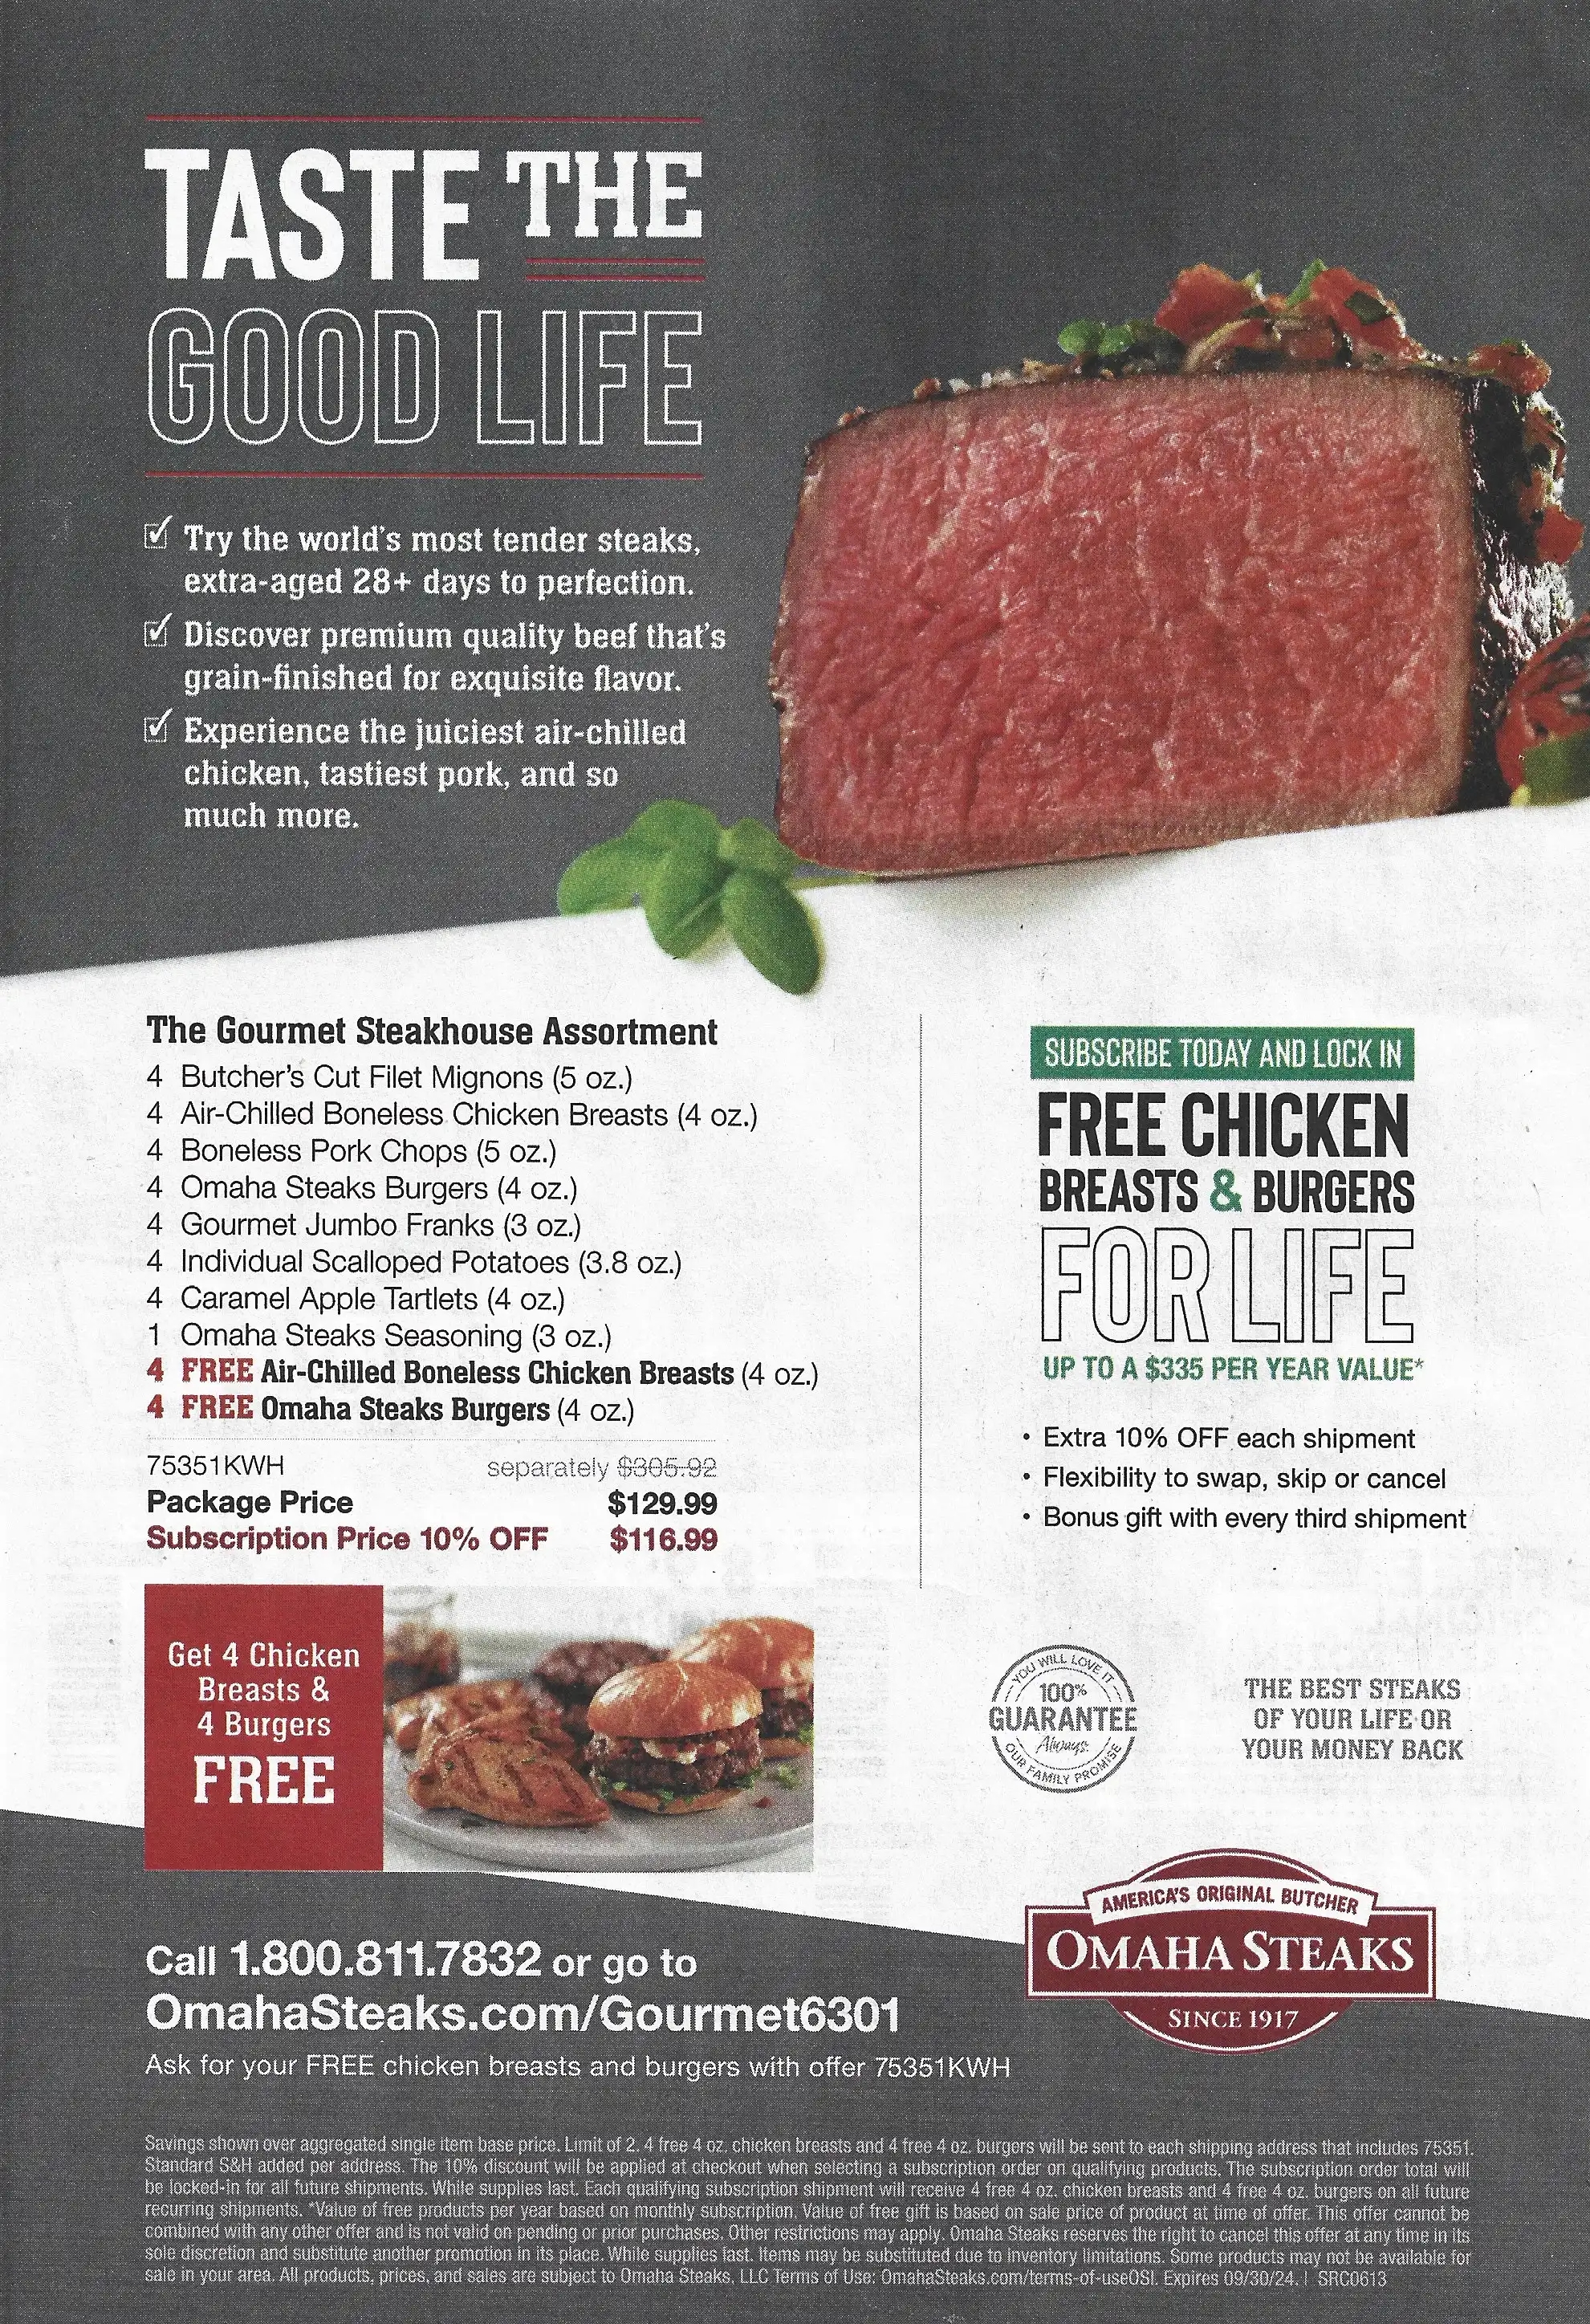 Omaha Steaks The Gourmet Steakhouse Assortment + Free Chicken Breasts & Burgers For Life Promo Code